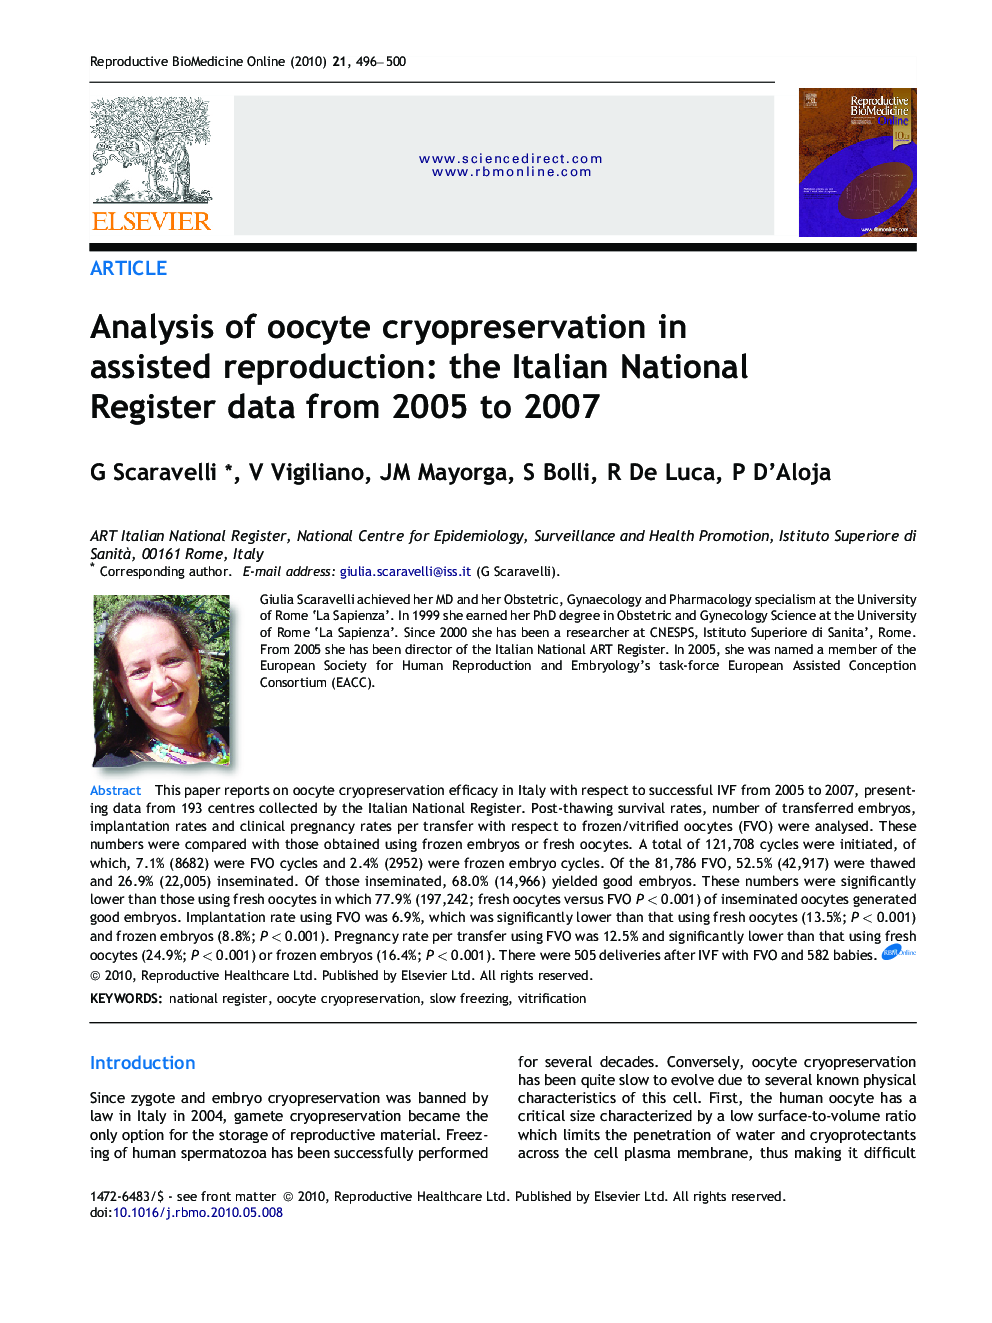 Analysis of oocyte cryopreservation in assisted reproduction: the Italian National Register data from 2005 to 2007 